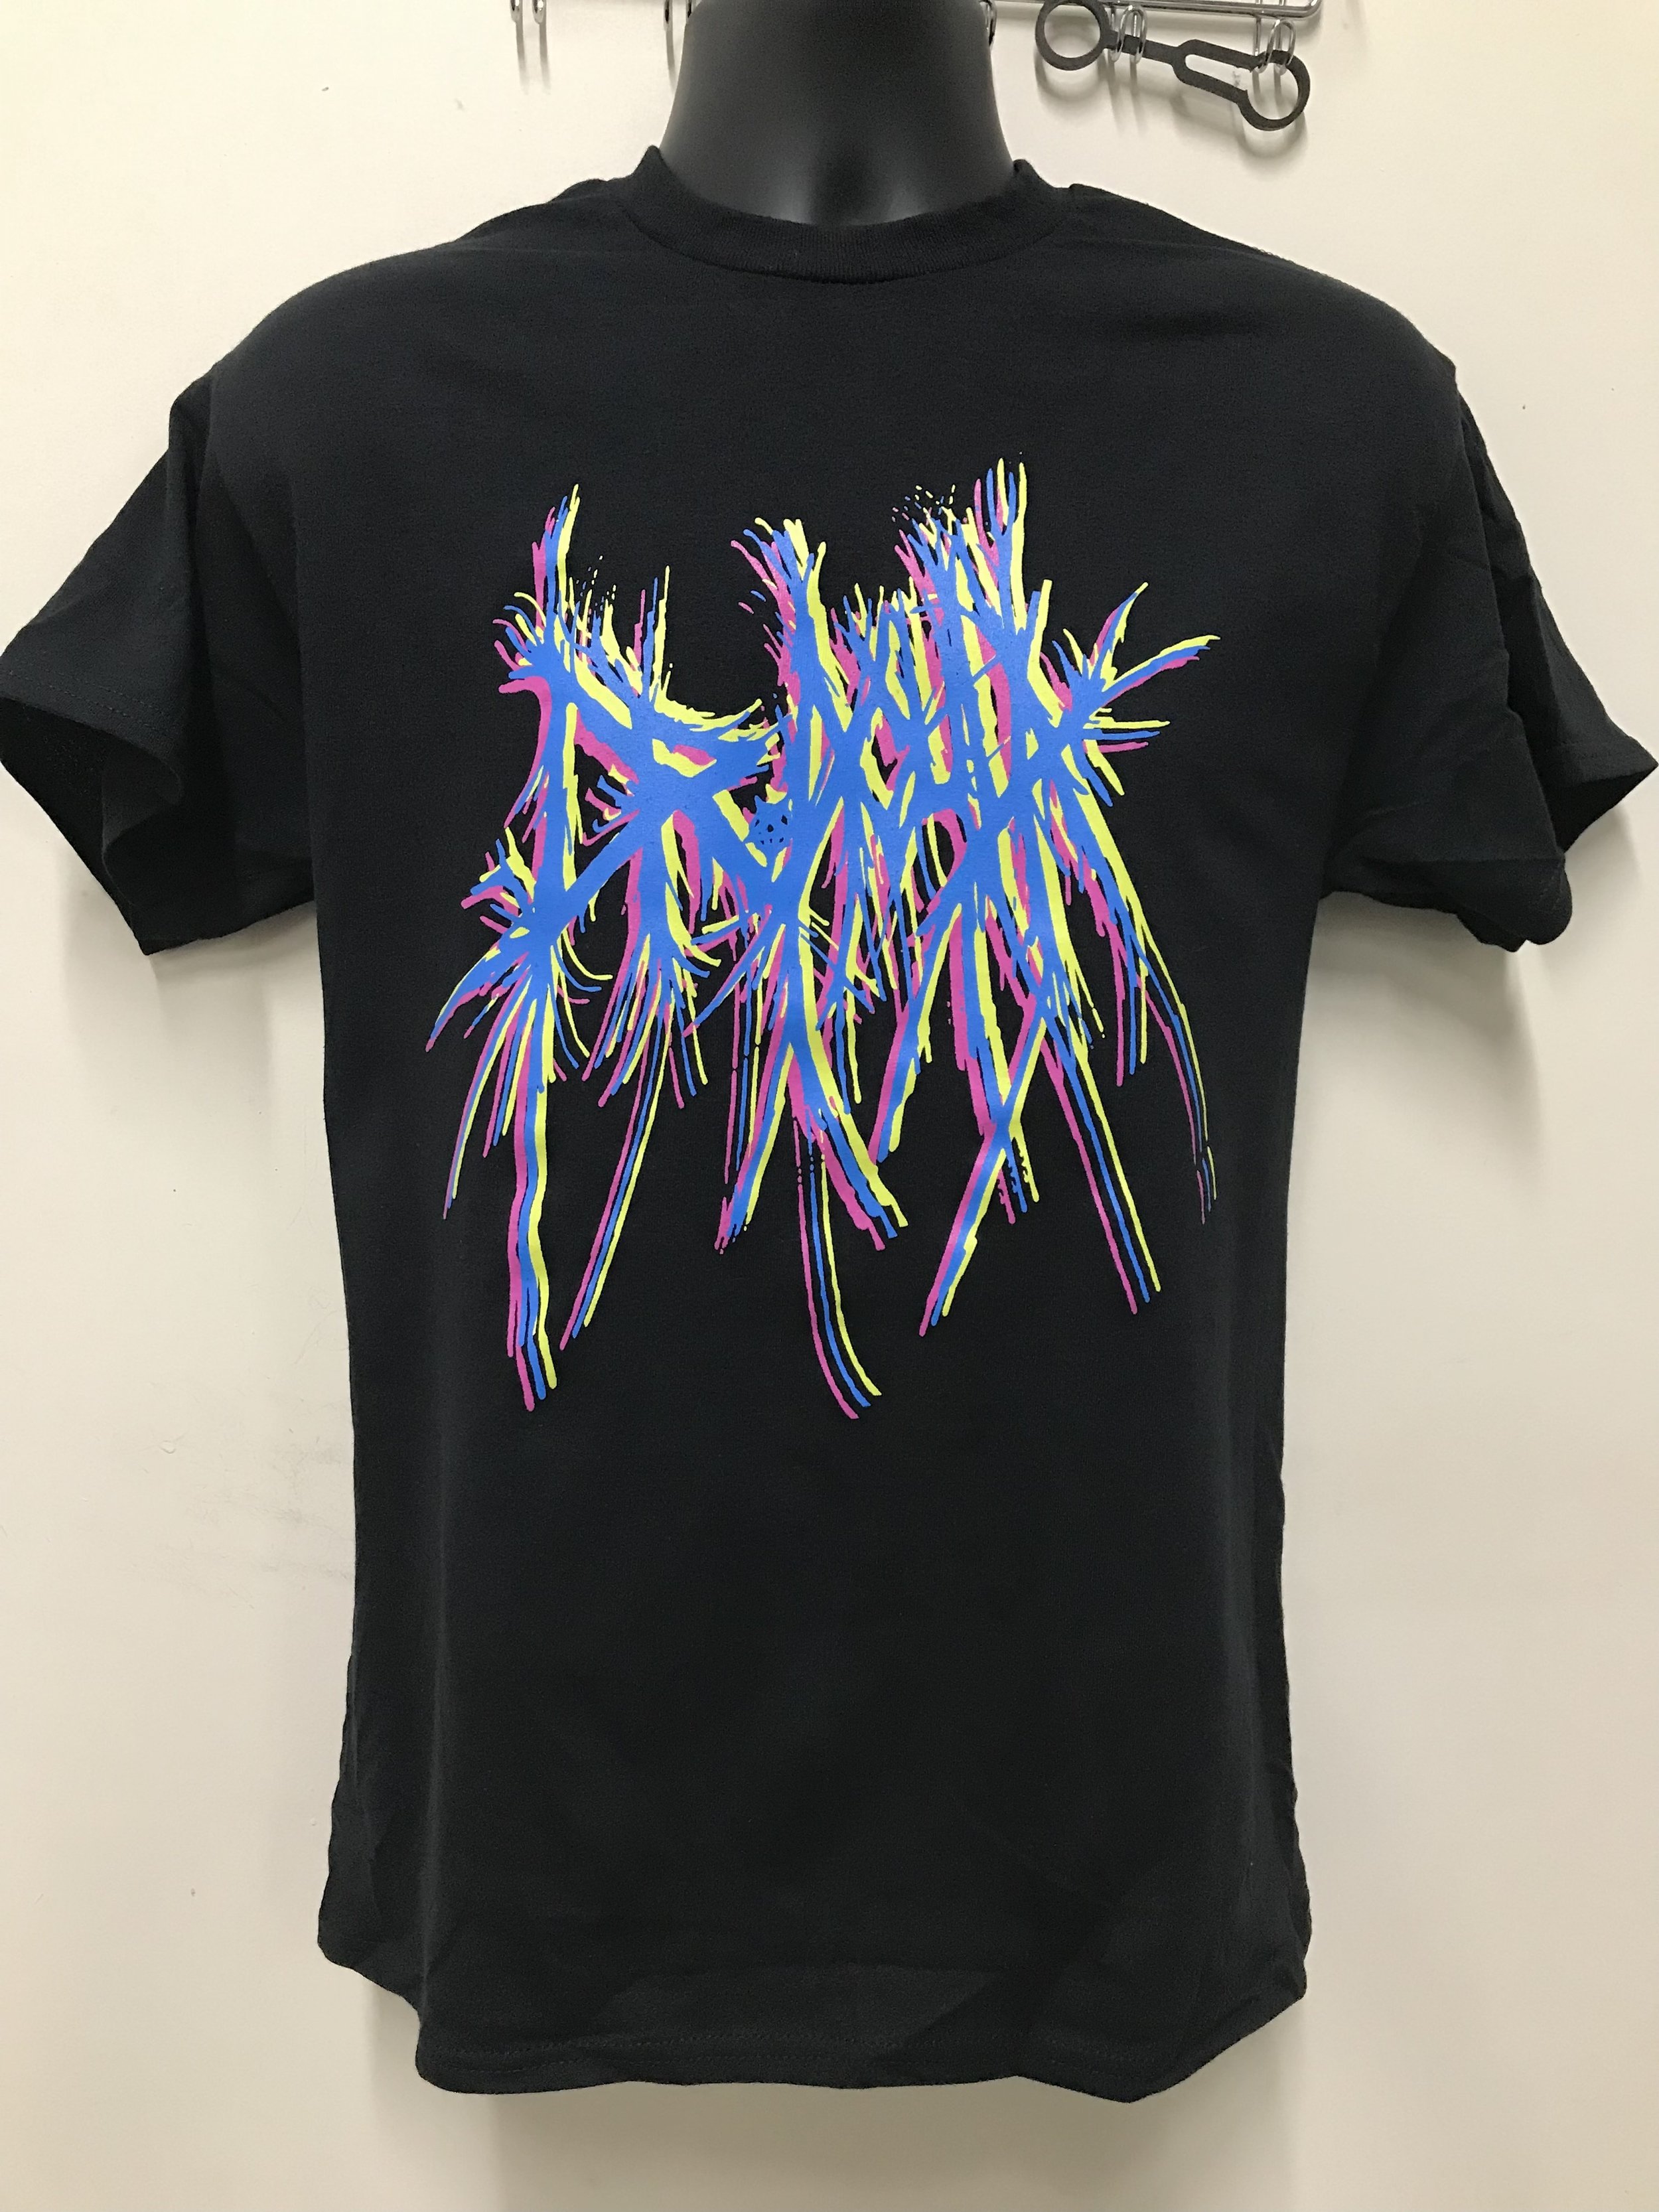 Florescent Multi-Colors Screen Printed on Black Tee Shirt